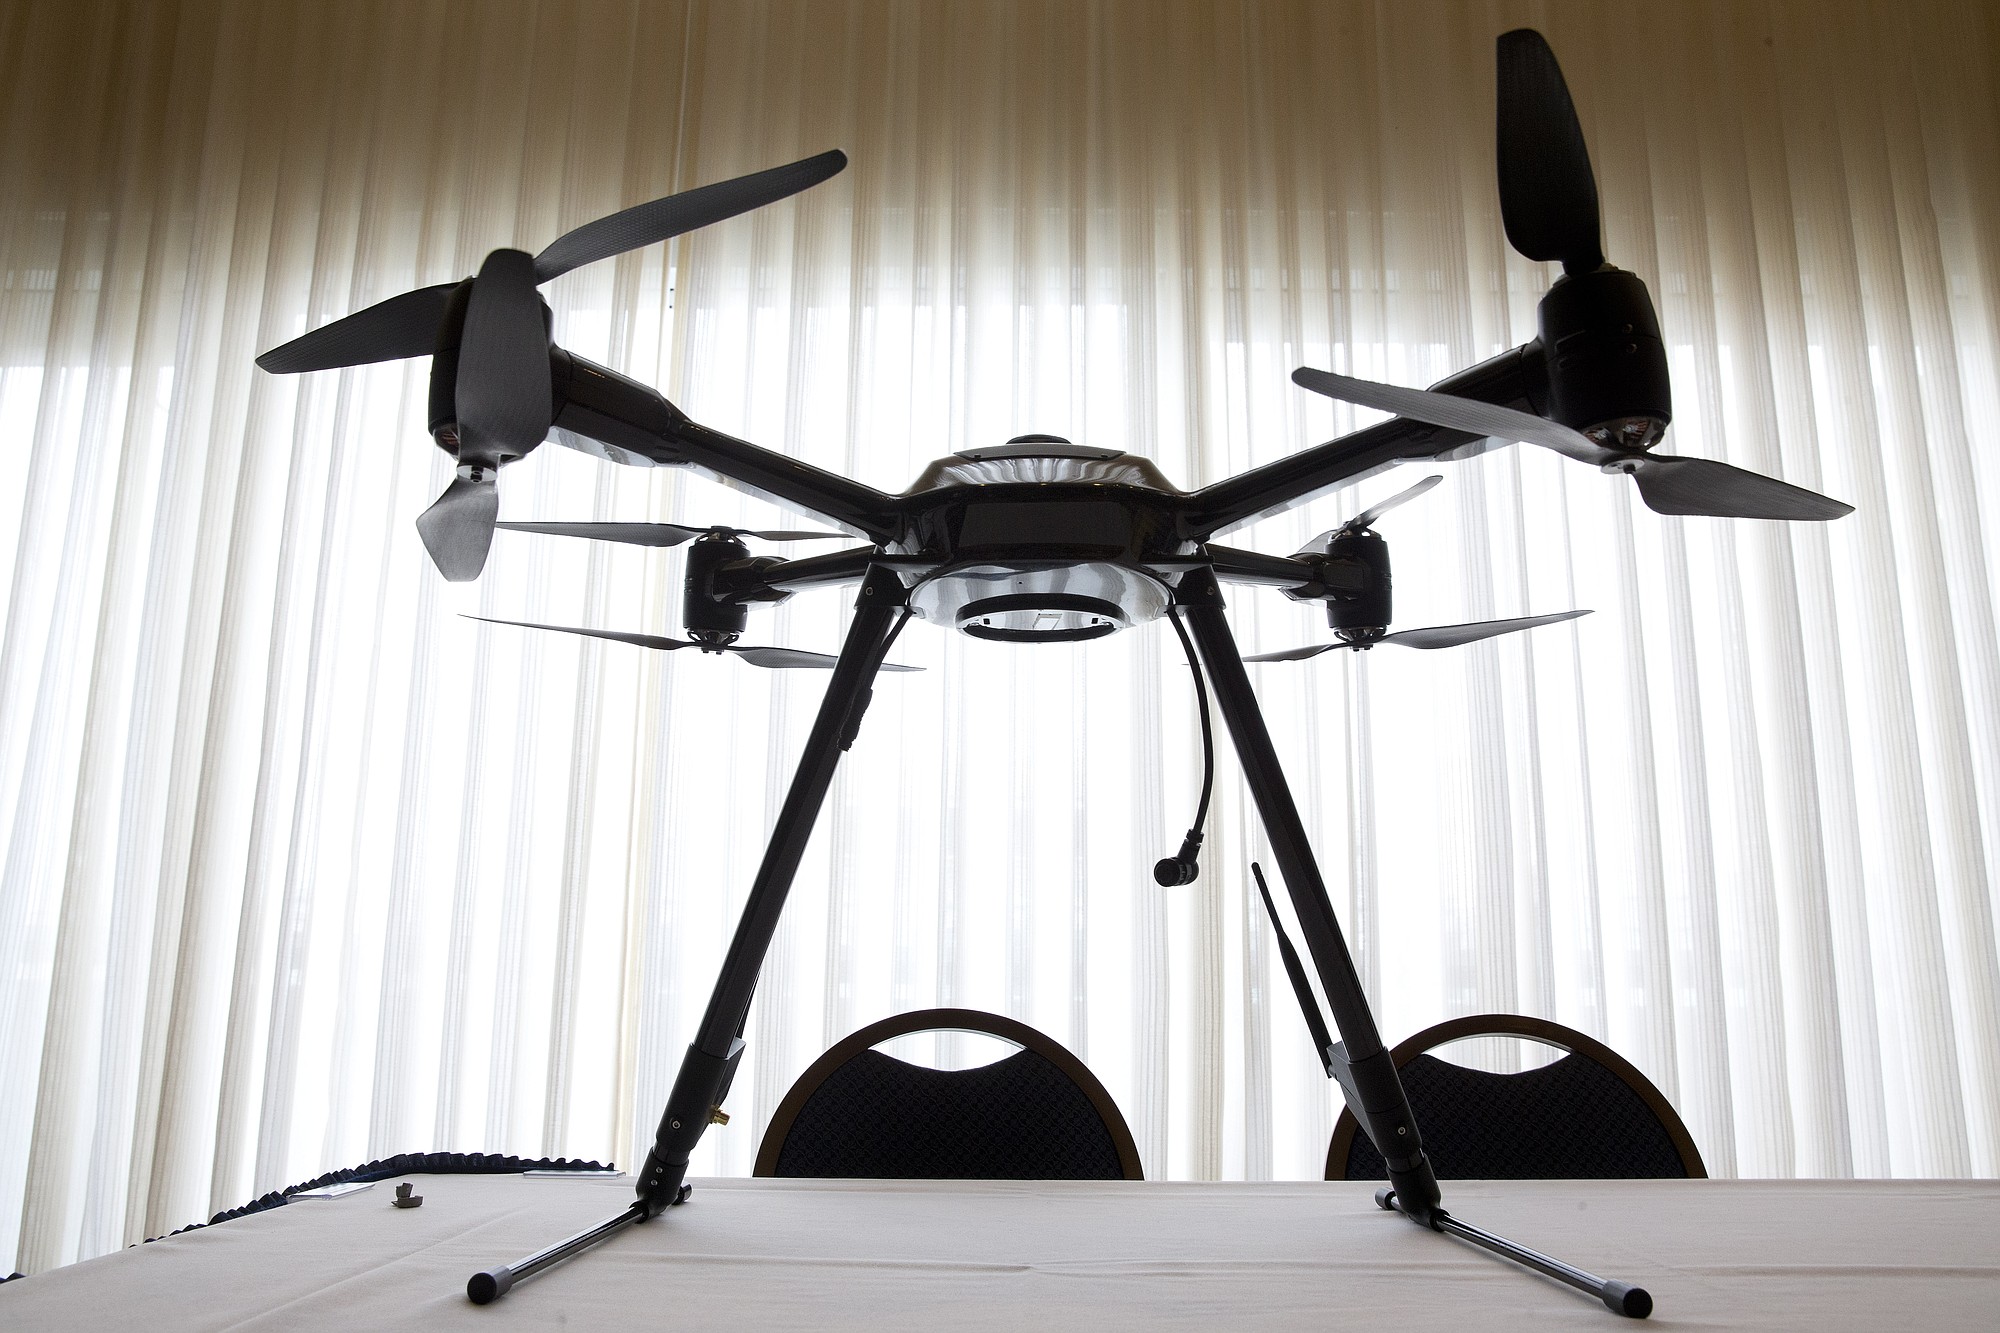 The Aerialtronics Altura Zenith drone is seen last month at an event at the National Press Club in Washington. An economic analysis by the Federal Aviation Administration indicates the agency, citing economic and safety benefits, is seeking regulations largely favorable to companies that want to use small drones.